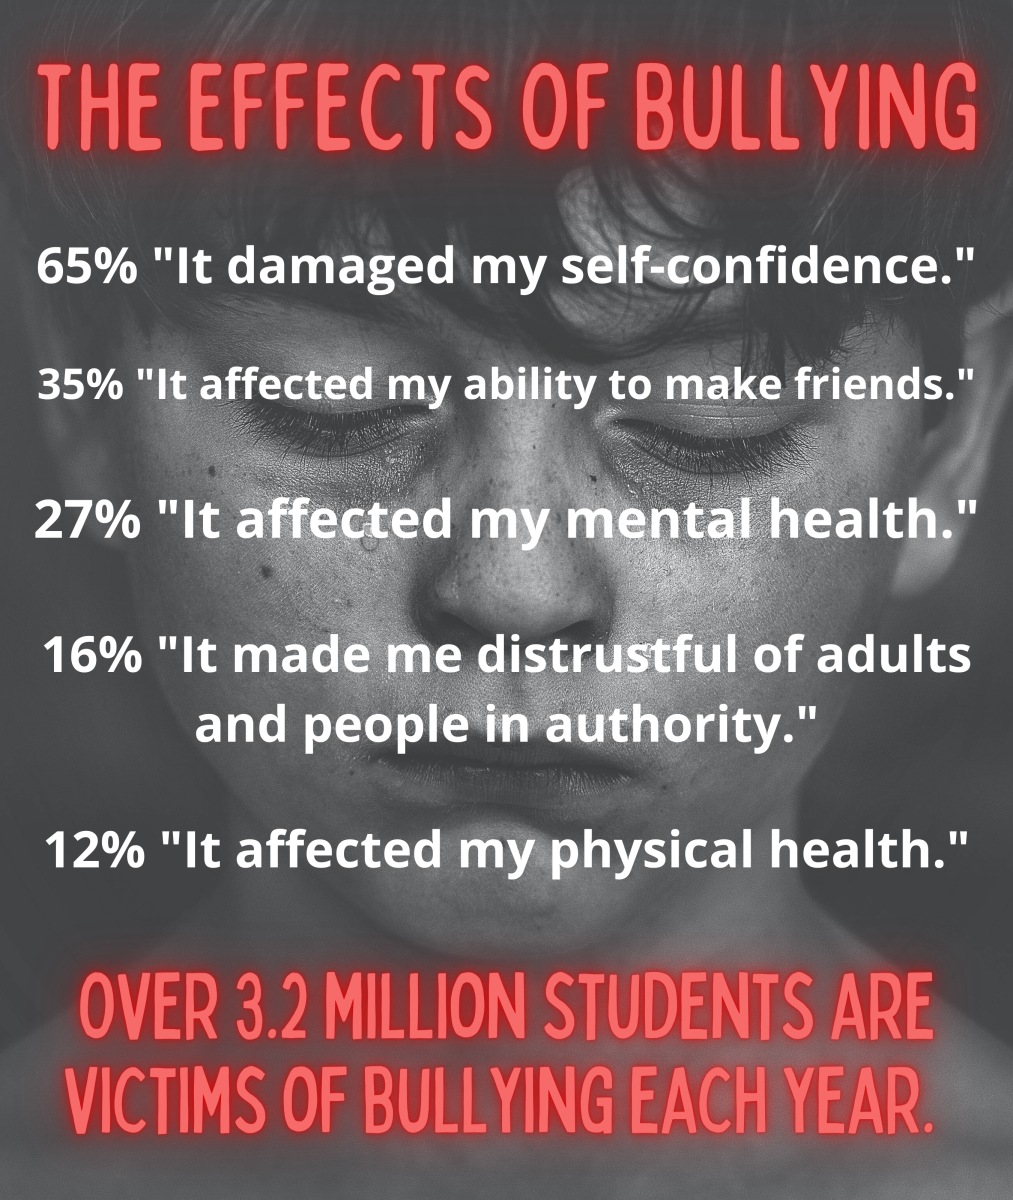 The statistics about bullying, which affects over 3.2 million students each year.